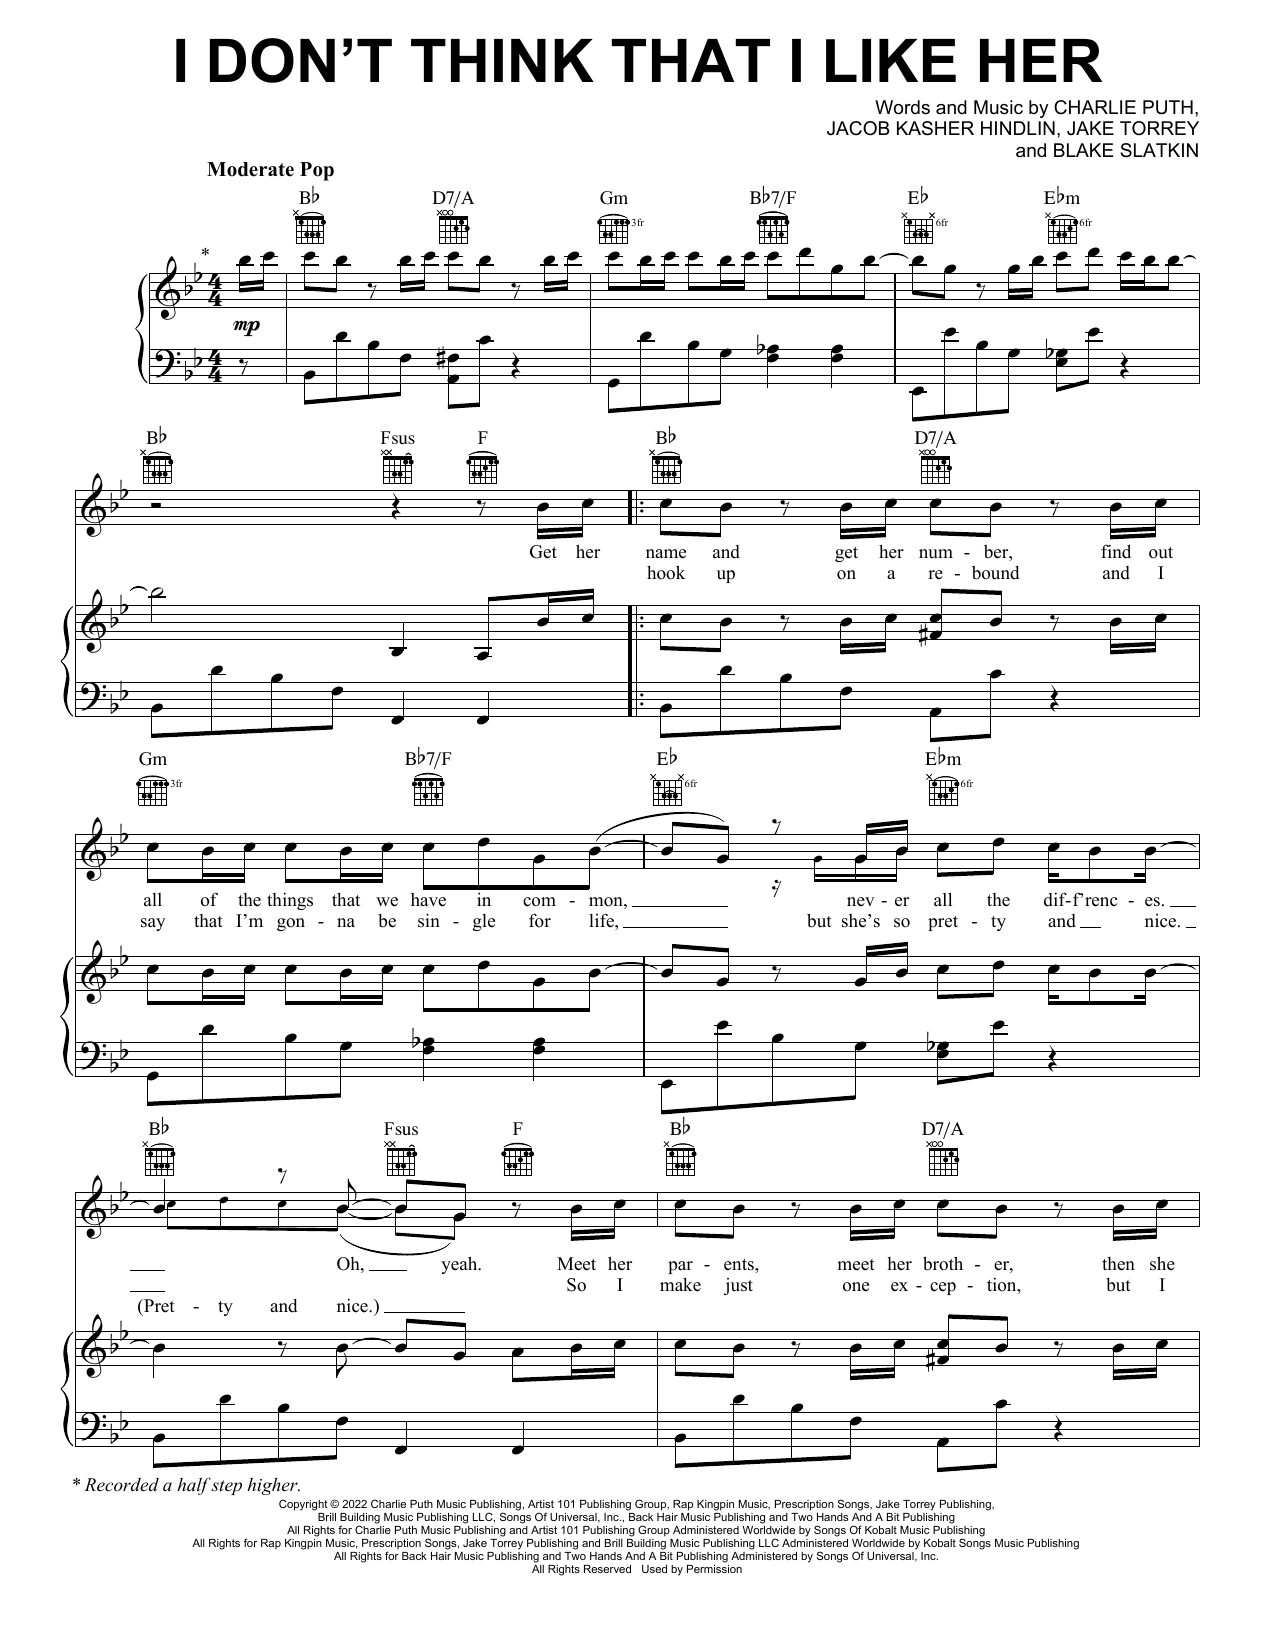 Charlie Puth I Don't Think That I Like Her sheet music notes printable PDF score